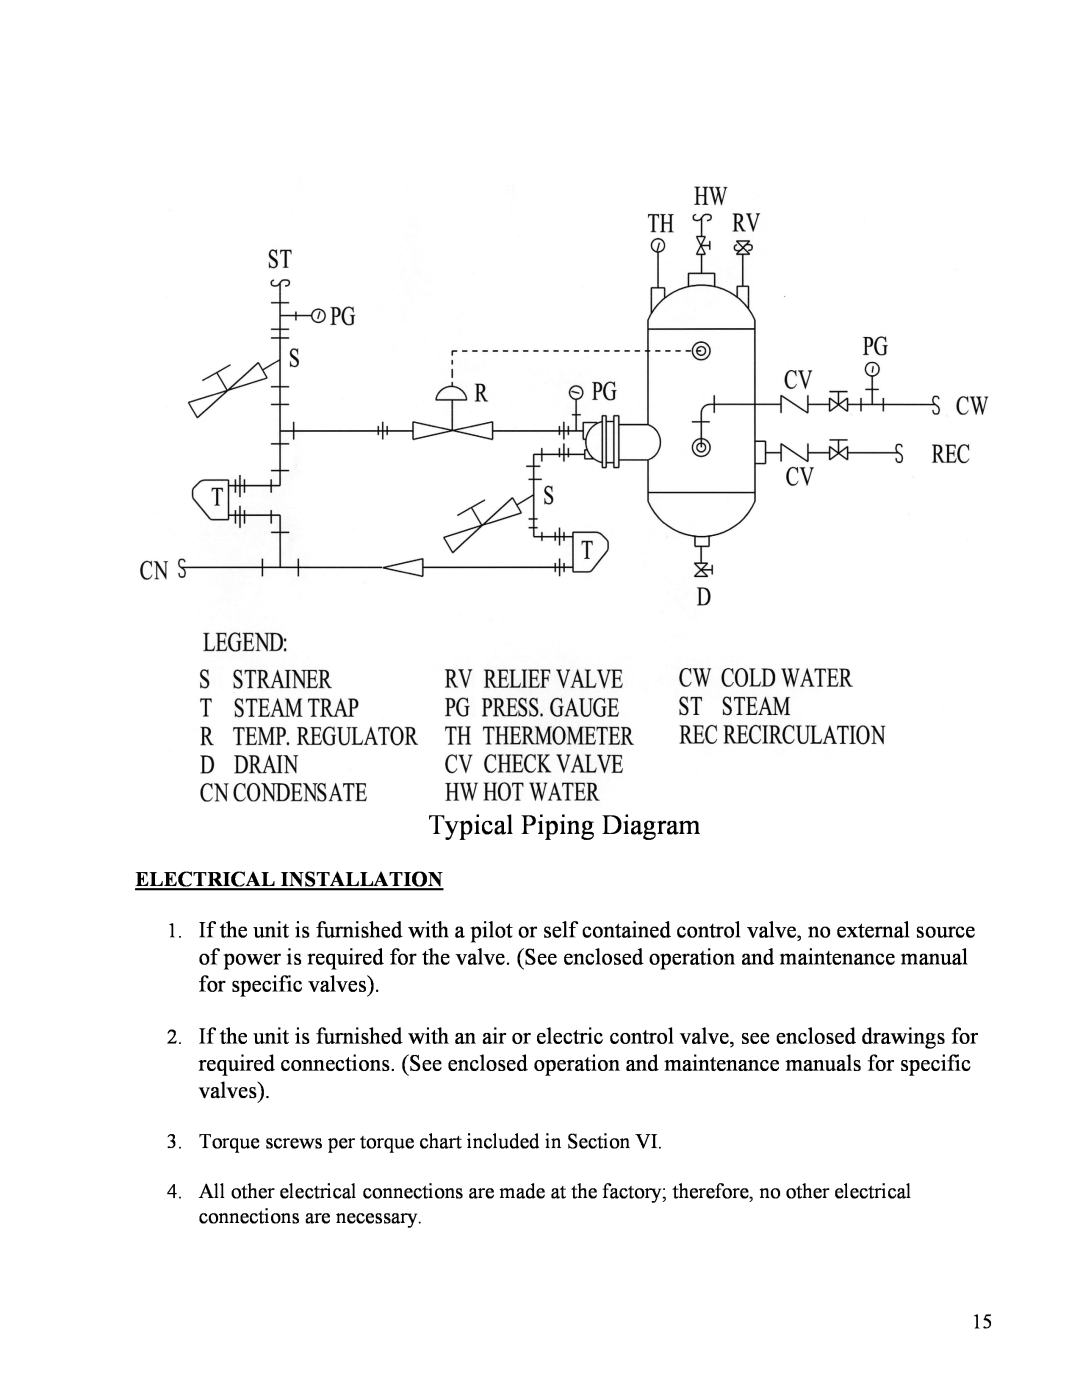 Hubbell STH manual Typical Piping Diagram, Electrical Installation 